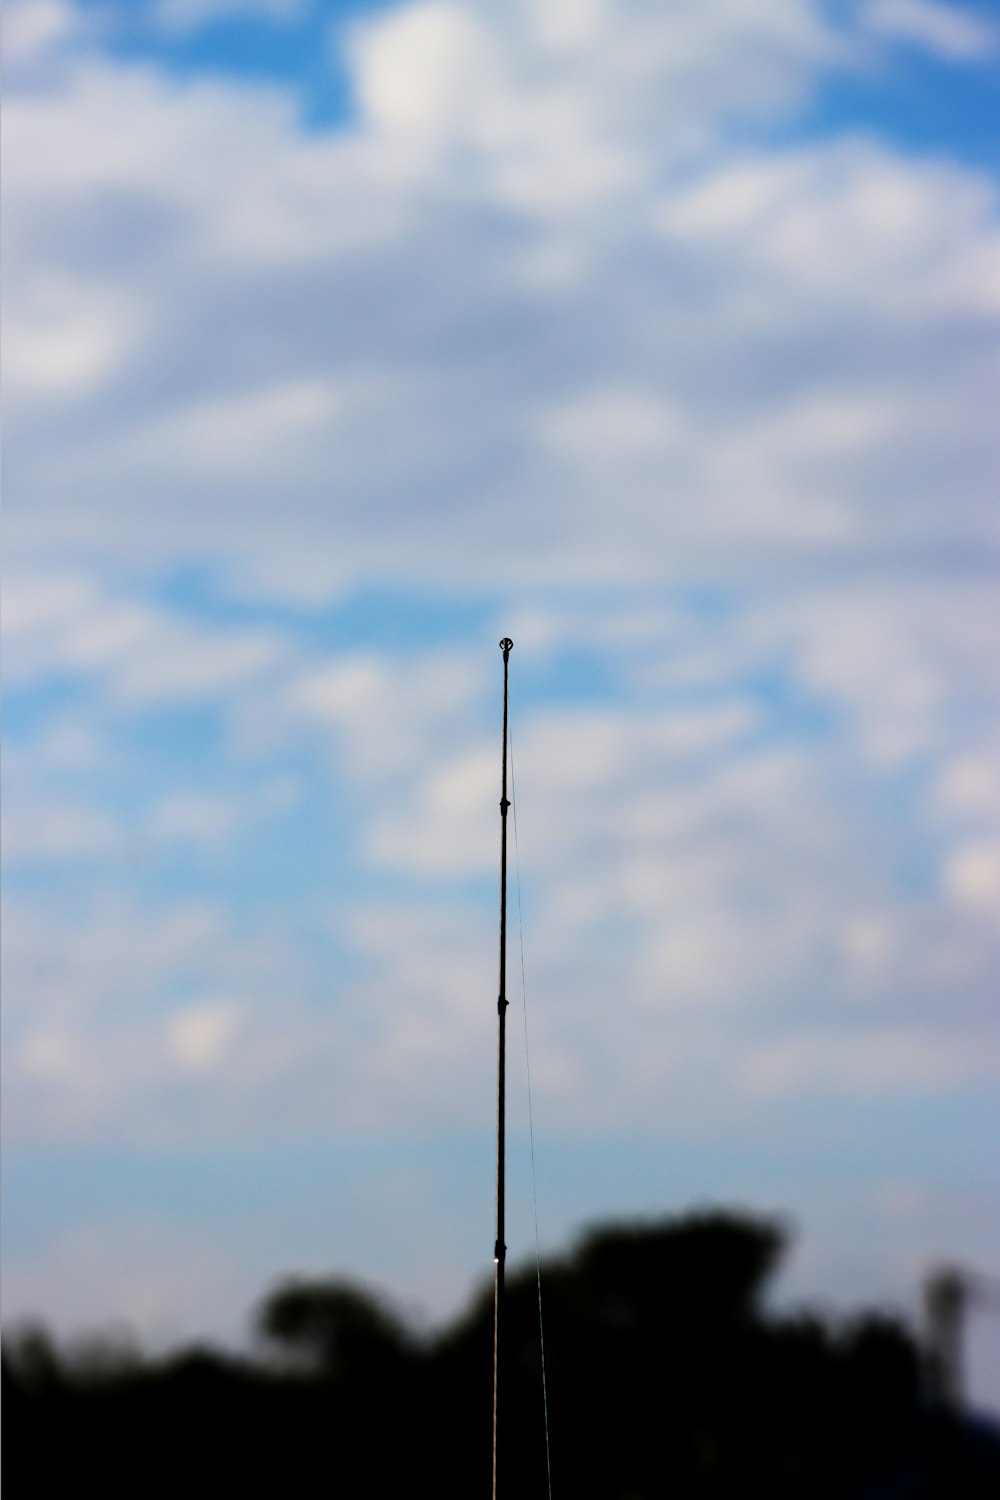 a black and white photo of a cell phone tower